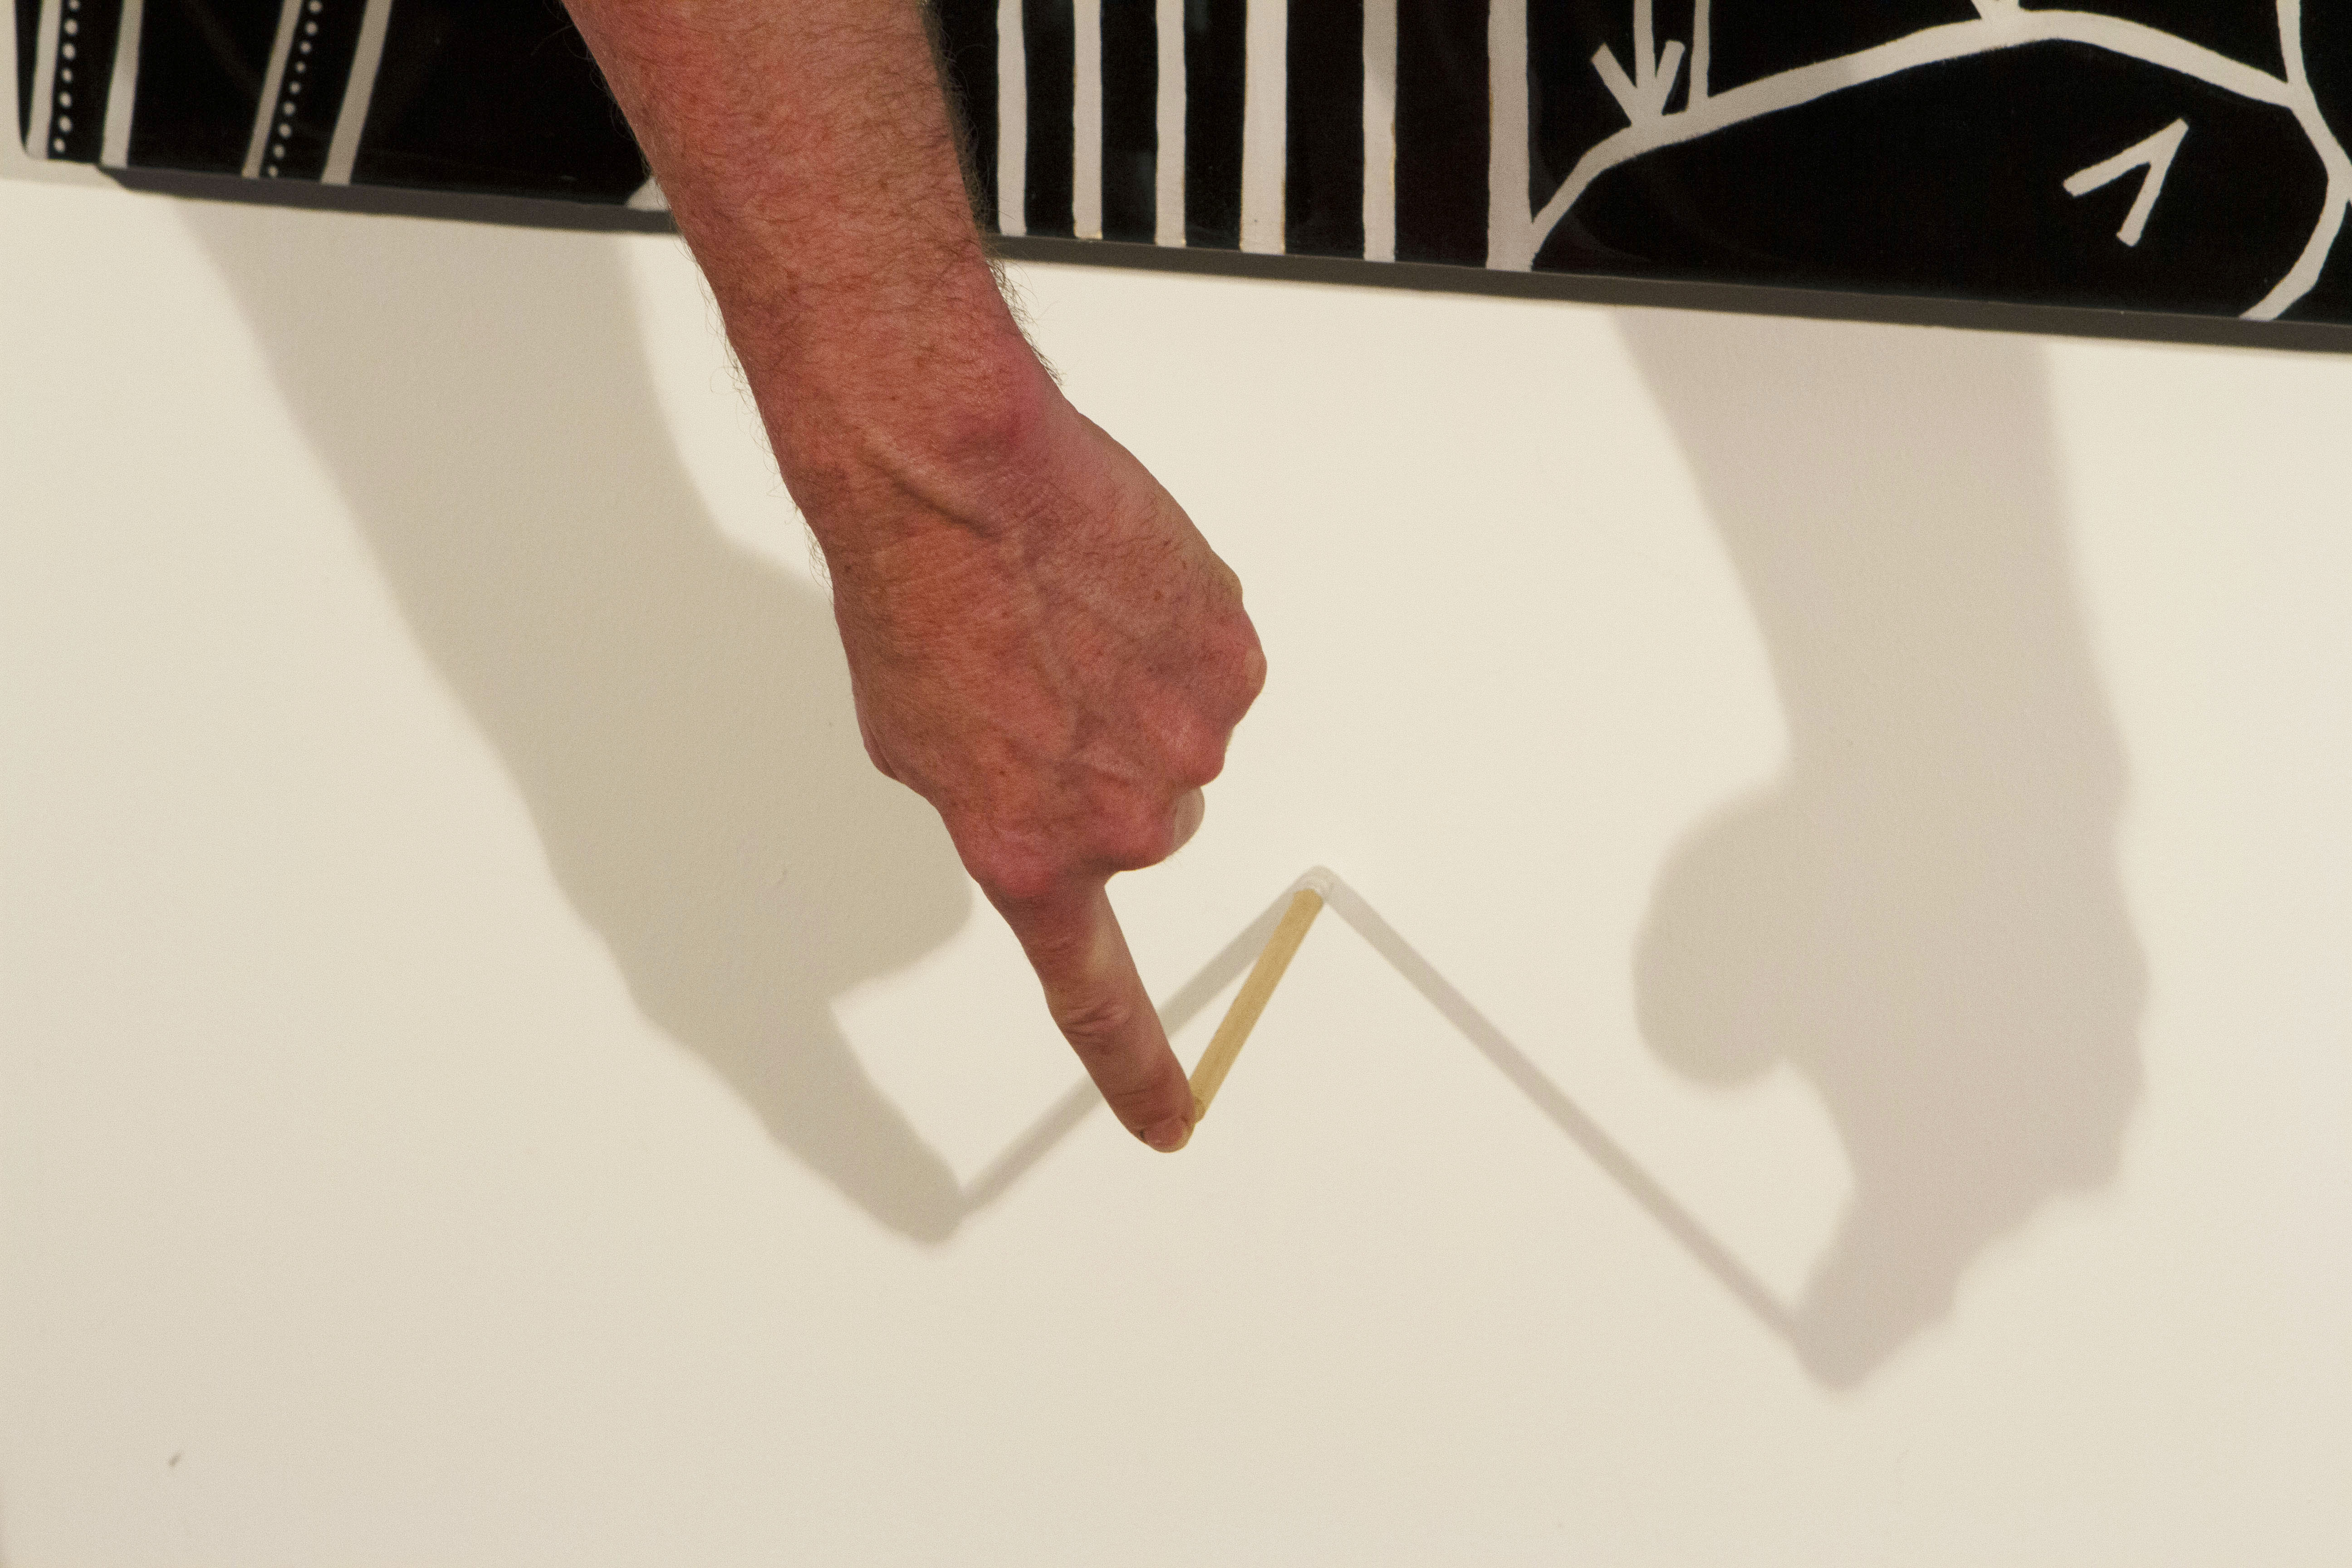 Photograph Your Resin Art Like A Pro - Test Your Shadows With The Pencil Trick